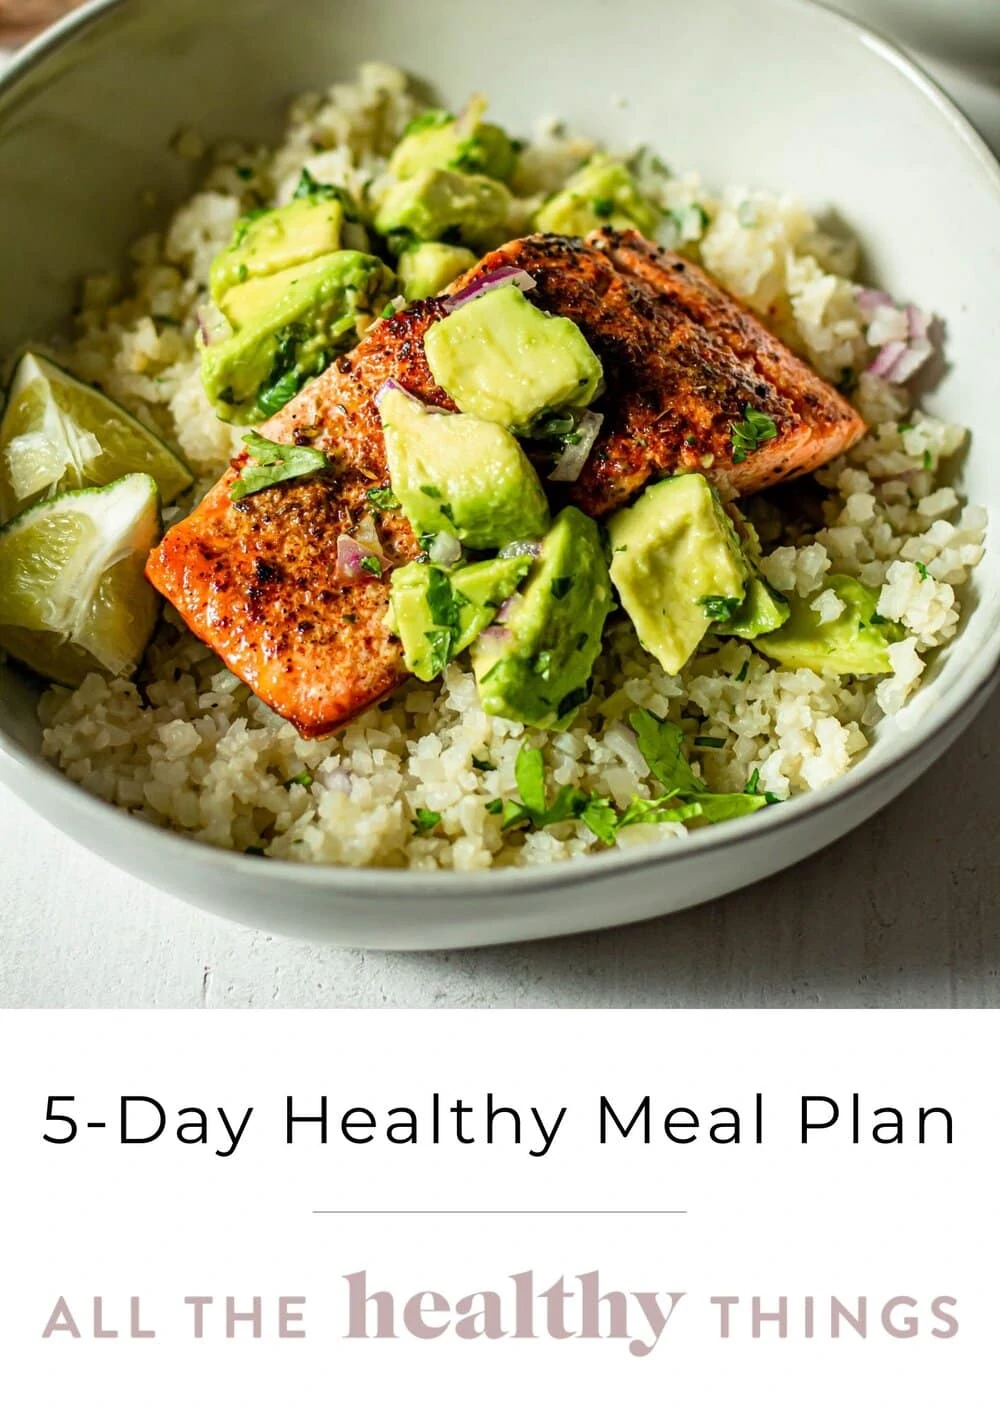 All the Healthy Things 5-Day Healthy Meal Plan-12.jpg